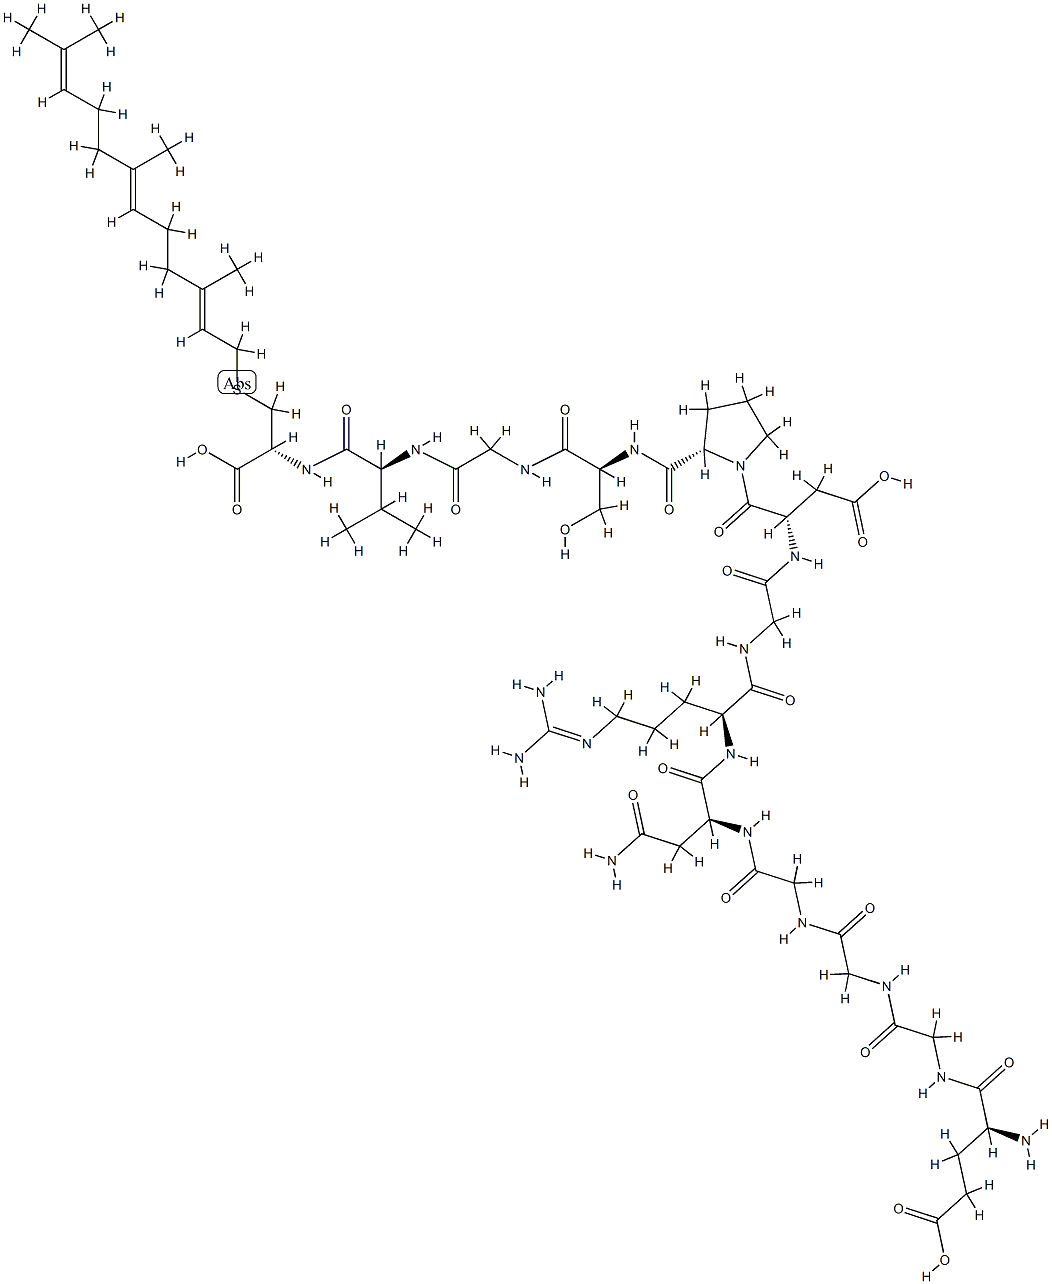 L-Glu-Gly-Gly-Gly-L-Asn-L-Arg-Gly-L-Asp-L-Pro-L-Ser-Gly-L-Val-S-[(2E,6E)-3,7,11-Trimethyl-2,6,10-dodecatrien-1-yl]-L-Cys-OH Structure